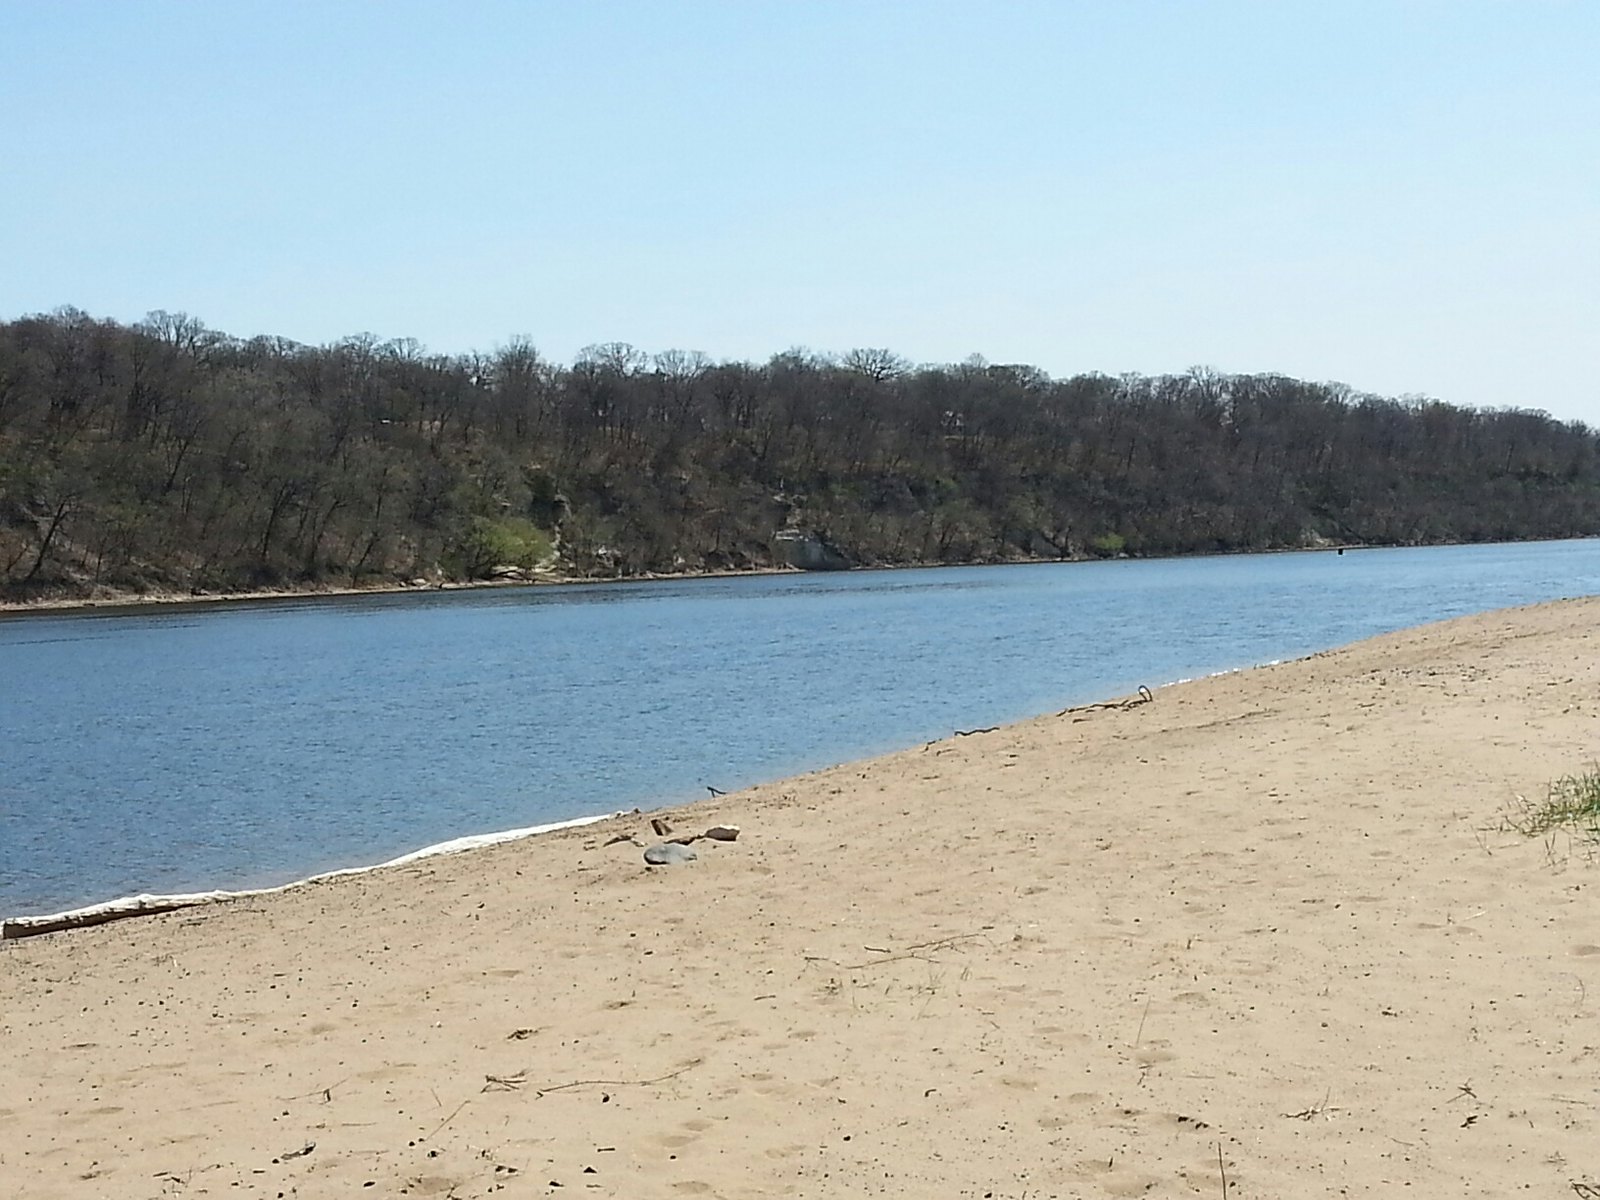 The Mississippi River seen during warm weather, with trees on the opposite bank and sandy beach in the foreground.